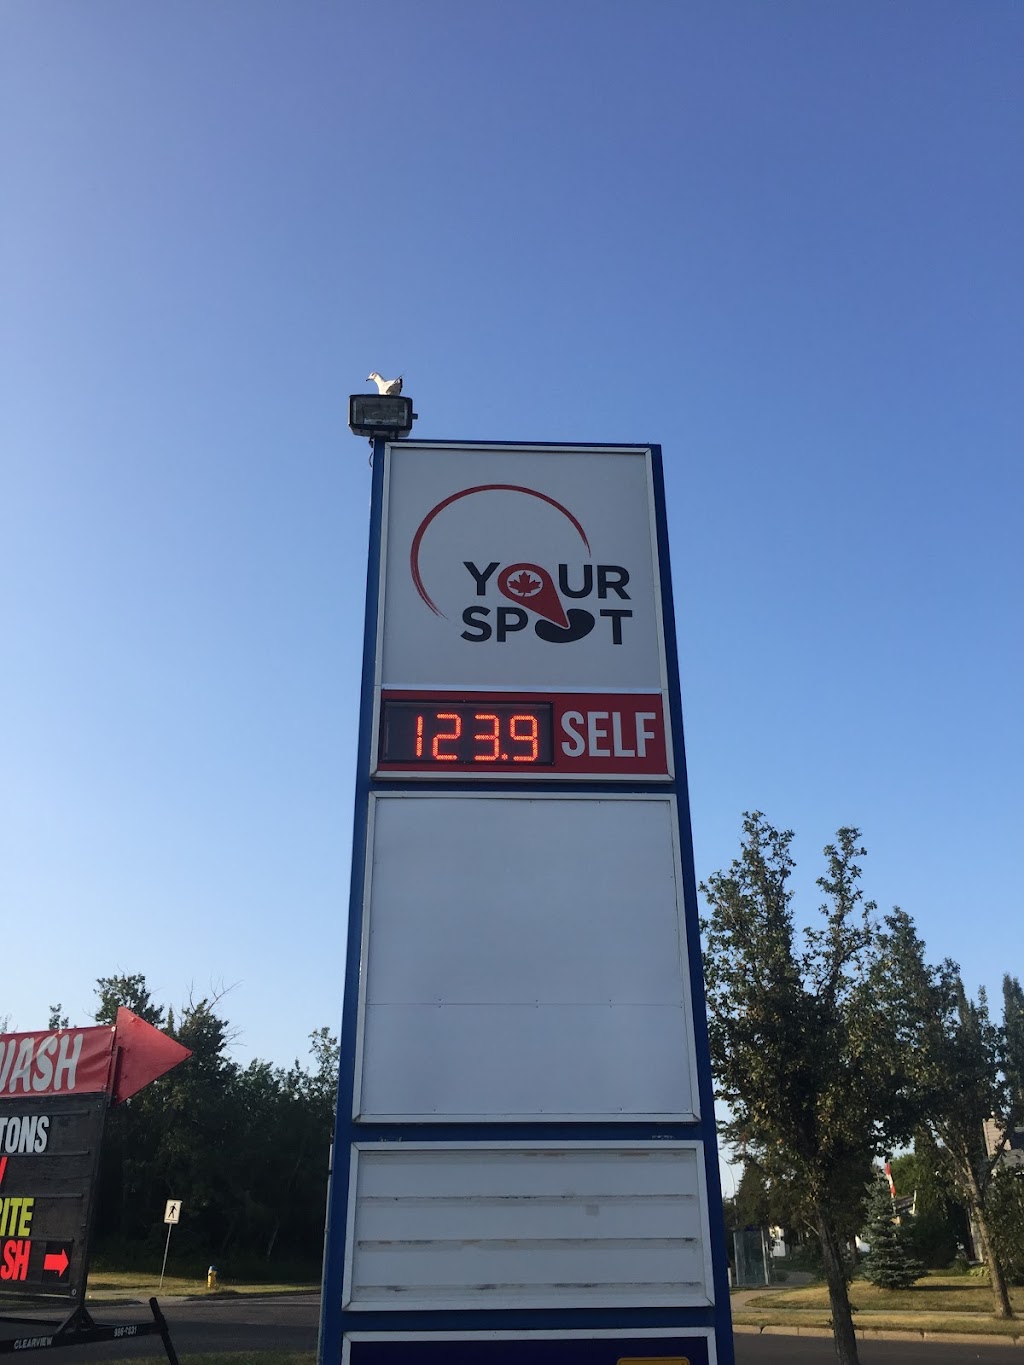 YOUR SPOT CONVENIENCE STORE AND GAS STATION | gas station | 12104 161 Ave NW, Edmonton, AB T5X 5M8, Canada | 7804569400 OR +1 780-456-9400